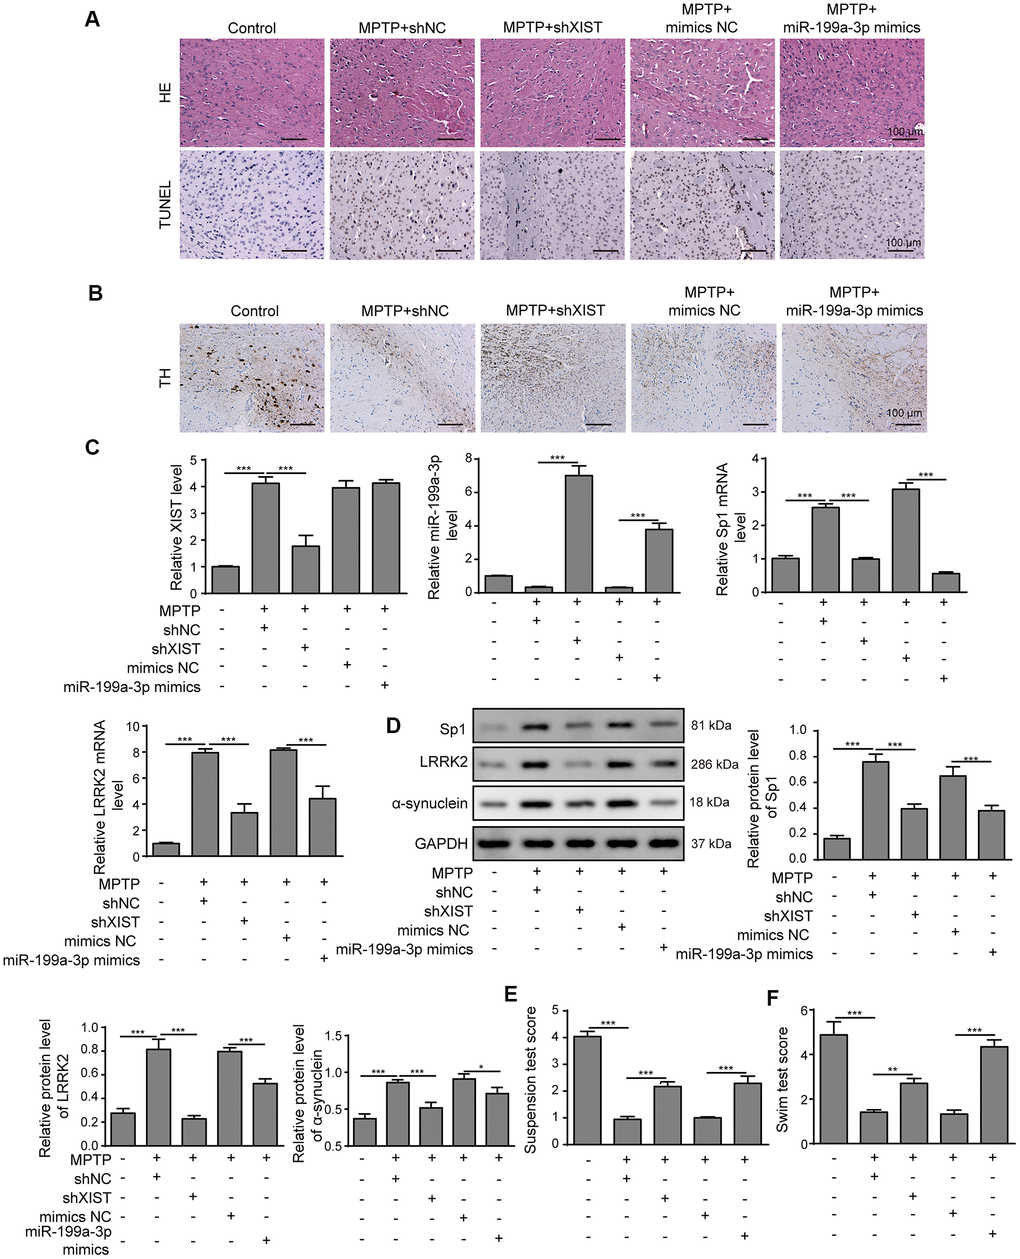 XIST knockdown or miR-199a-3p overexpression attenuates symptom severity in PD mouse models. (A) Representative microscopic images showing brain damage in the control, MPTP+shNC, MPTP+shXIST, MPTP+ mimics NC and MPTP+miR-199a-3p mimics groups. Cell apoptosis in the mouse brain tissues was detected by TUNEL staining. (B) Dopaminergic neuronal injury was assessed by TH immunohistochemistry. (C) Relative expression of XIST, miR-199a-3p, Sp1 mRNA and LRRK2 mRNA in the indicated groups was determined by qPCR. (D) Western blot results showed that the protein expression of Sp1, LRRK2 and α-synuclein in the PD mice was reduced by shXIST or miR-199a-3p overexpression. Animal behavioural tests, including (E) suspension tests and (F) swim tests were performed, and the scores obtained for the indicated groups are shown. The data are representative of three experiments. *p p p 